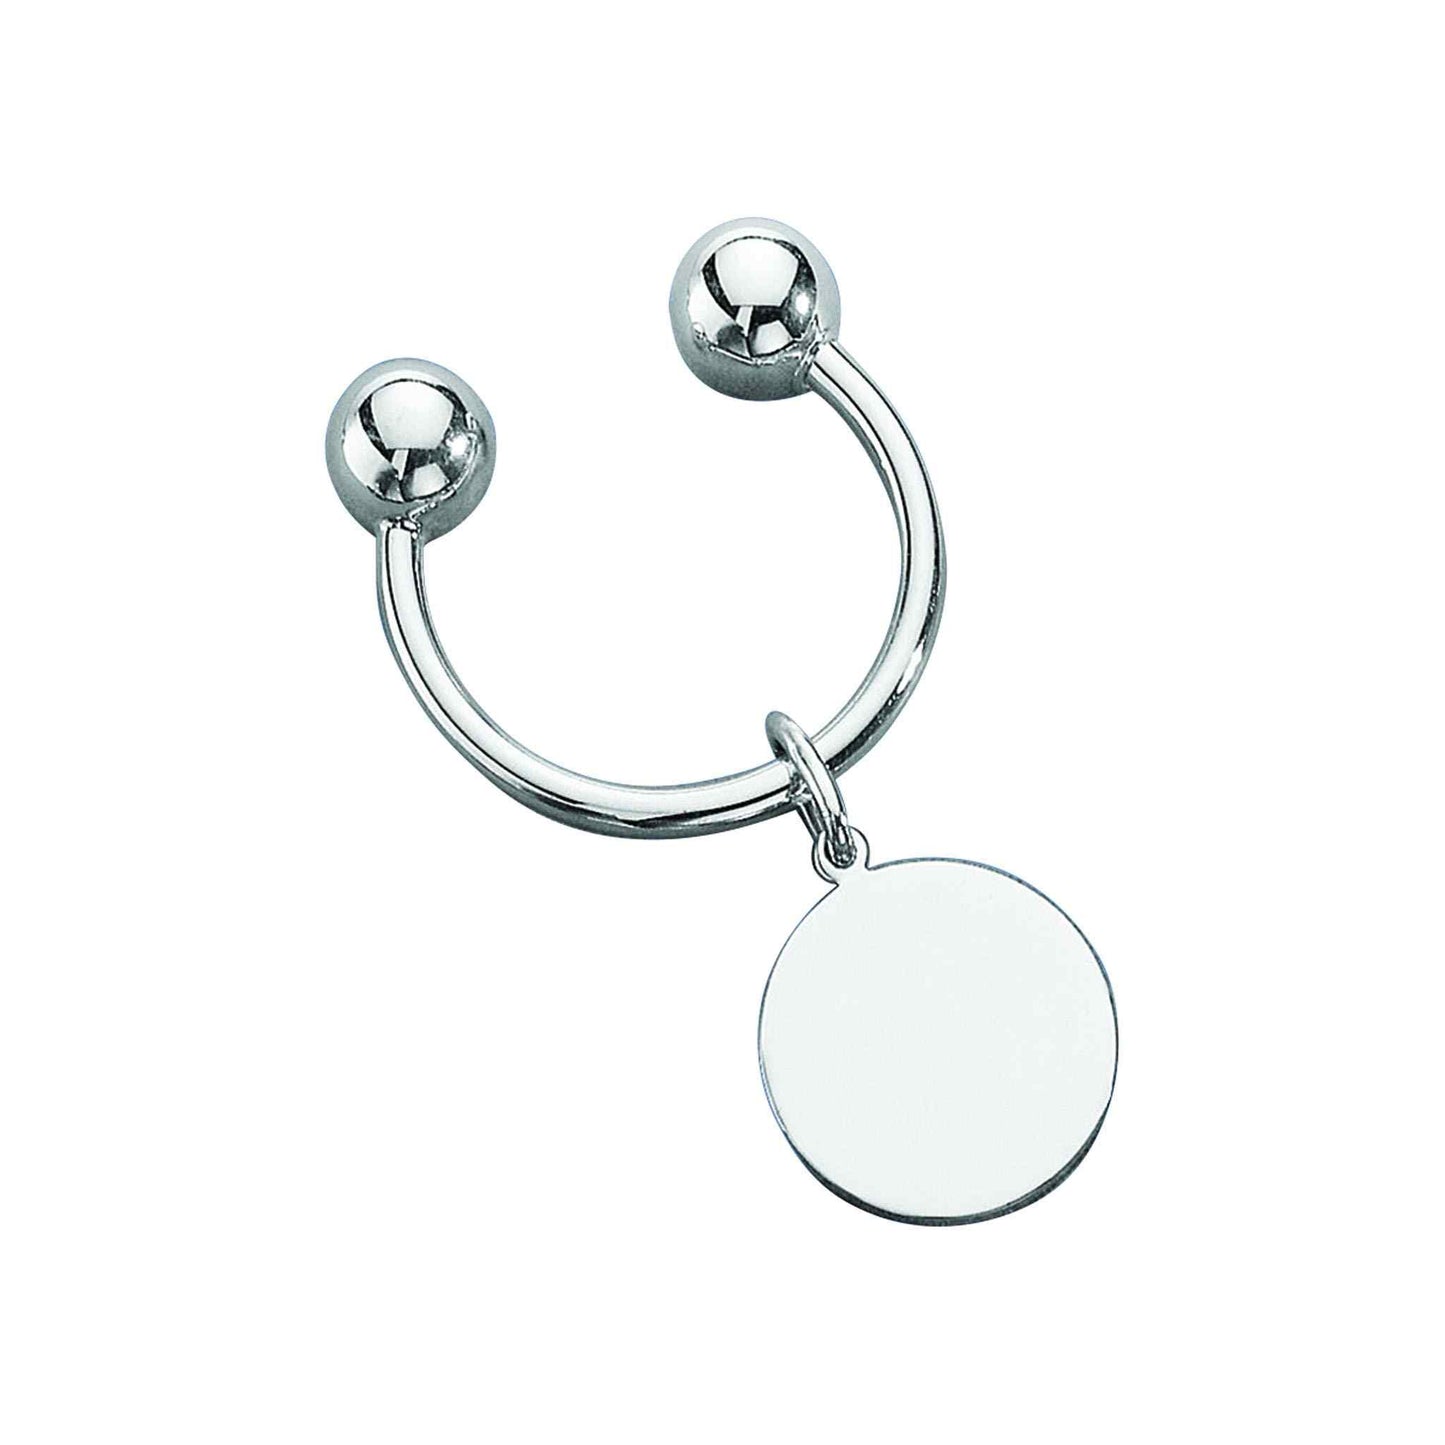 A sterling silver screw-ball key ring with round tag displayed on a neutral white background.